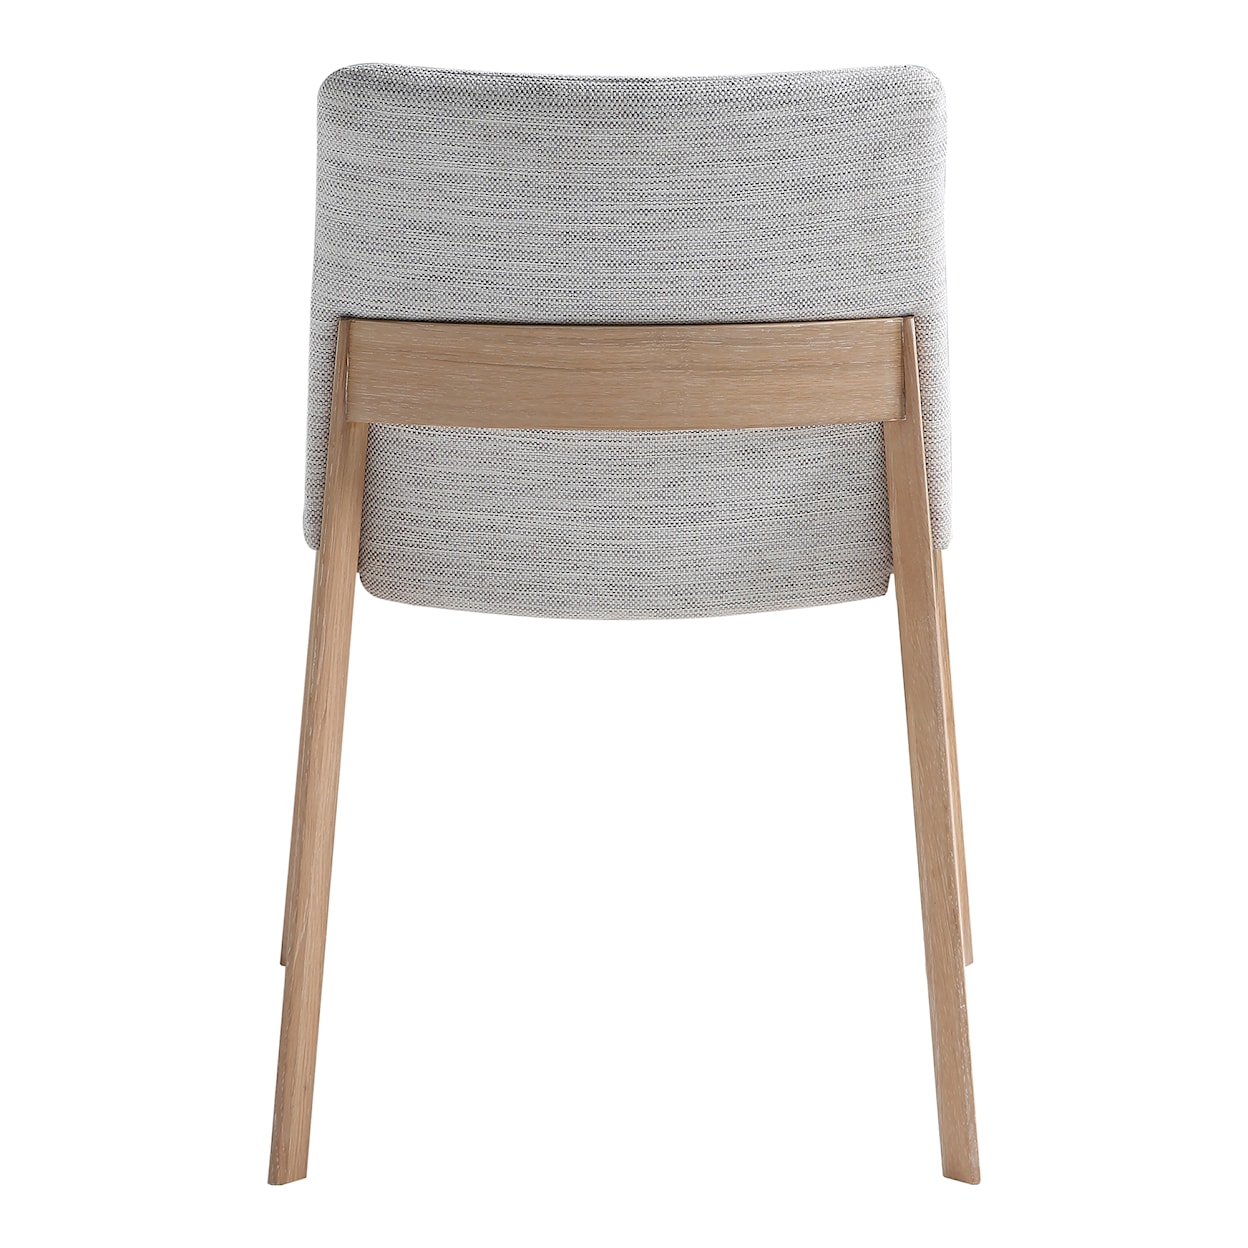 Moe's Home Collection Deco Deco Oak Dining Chair Light Grey-M2